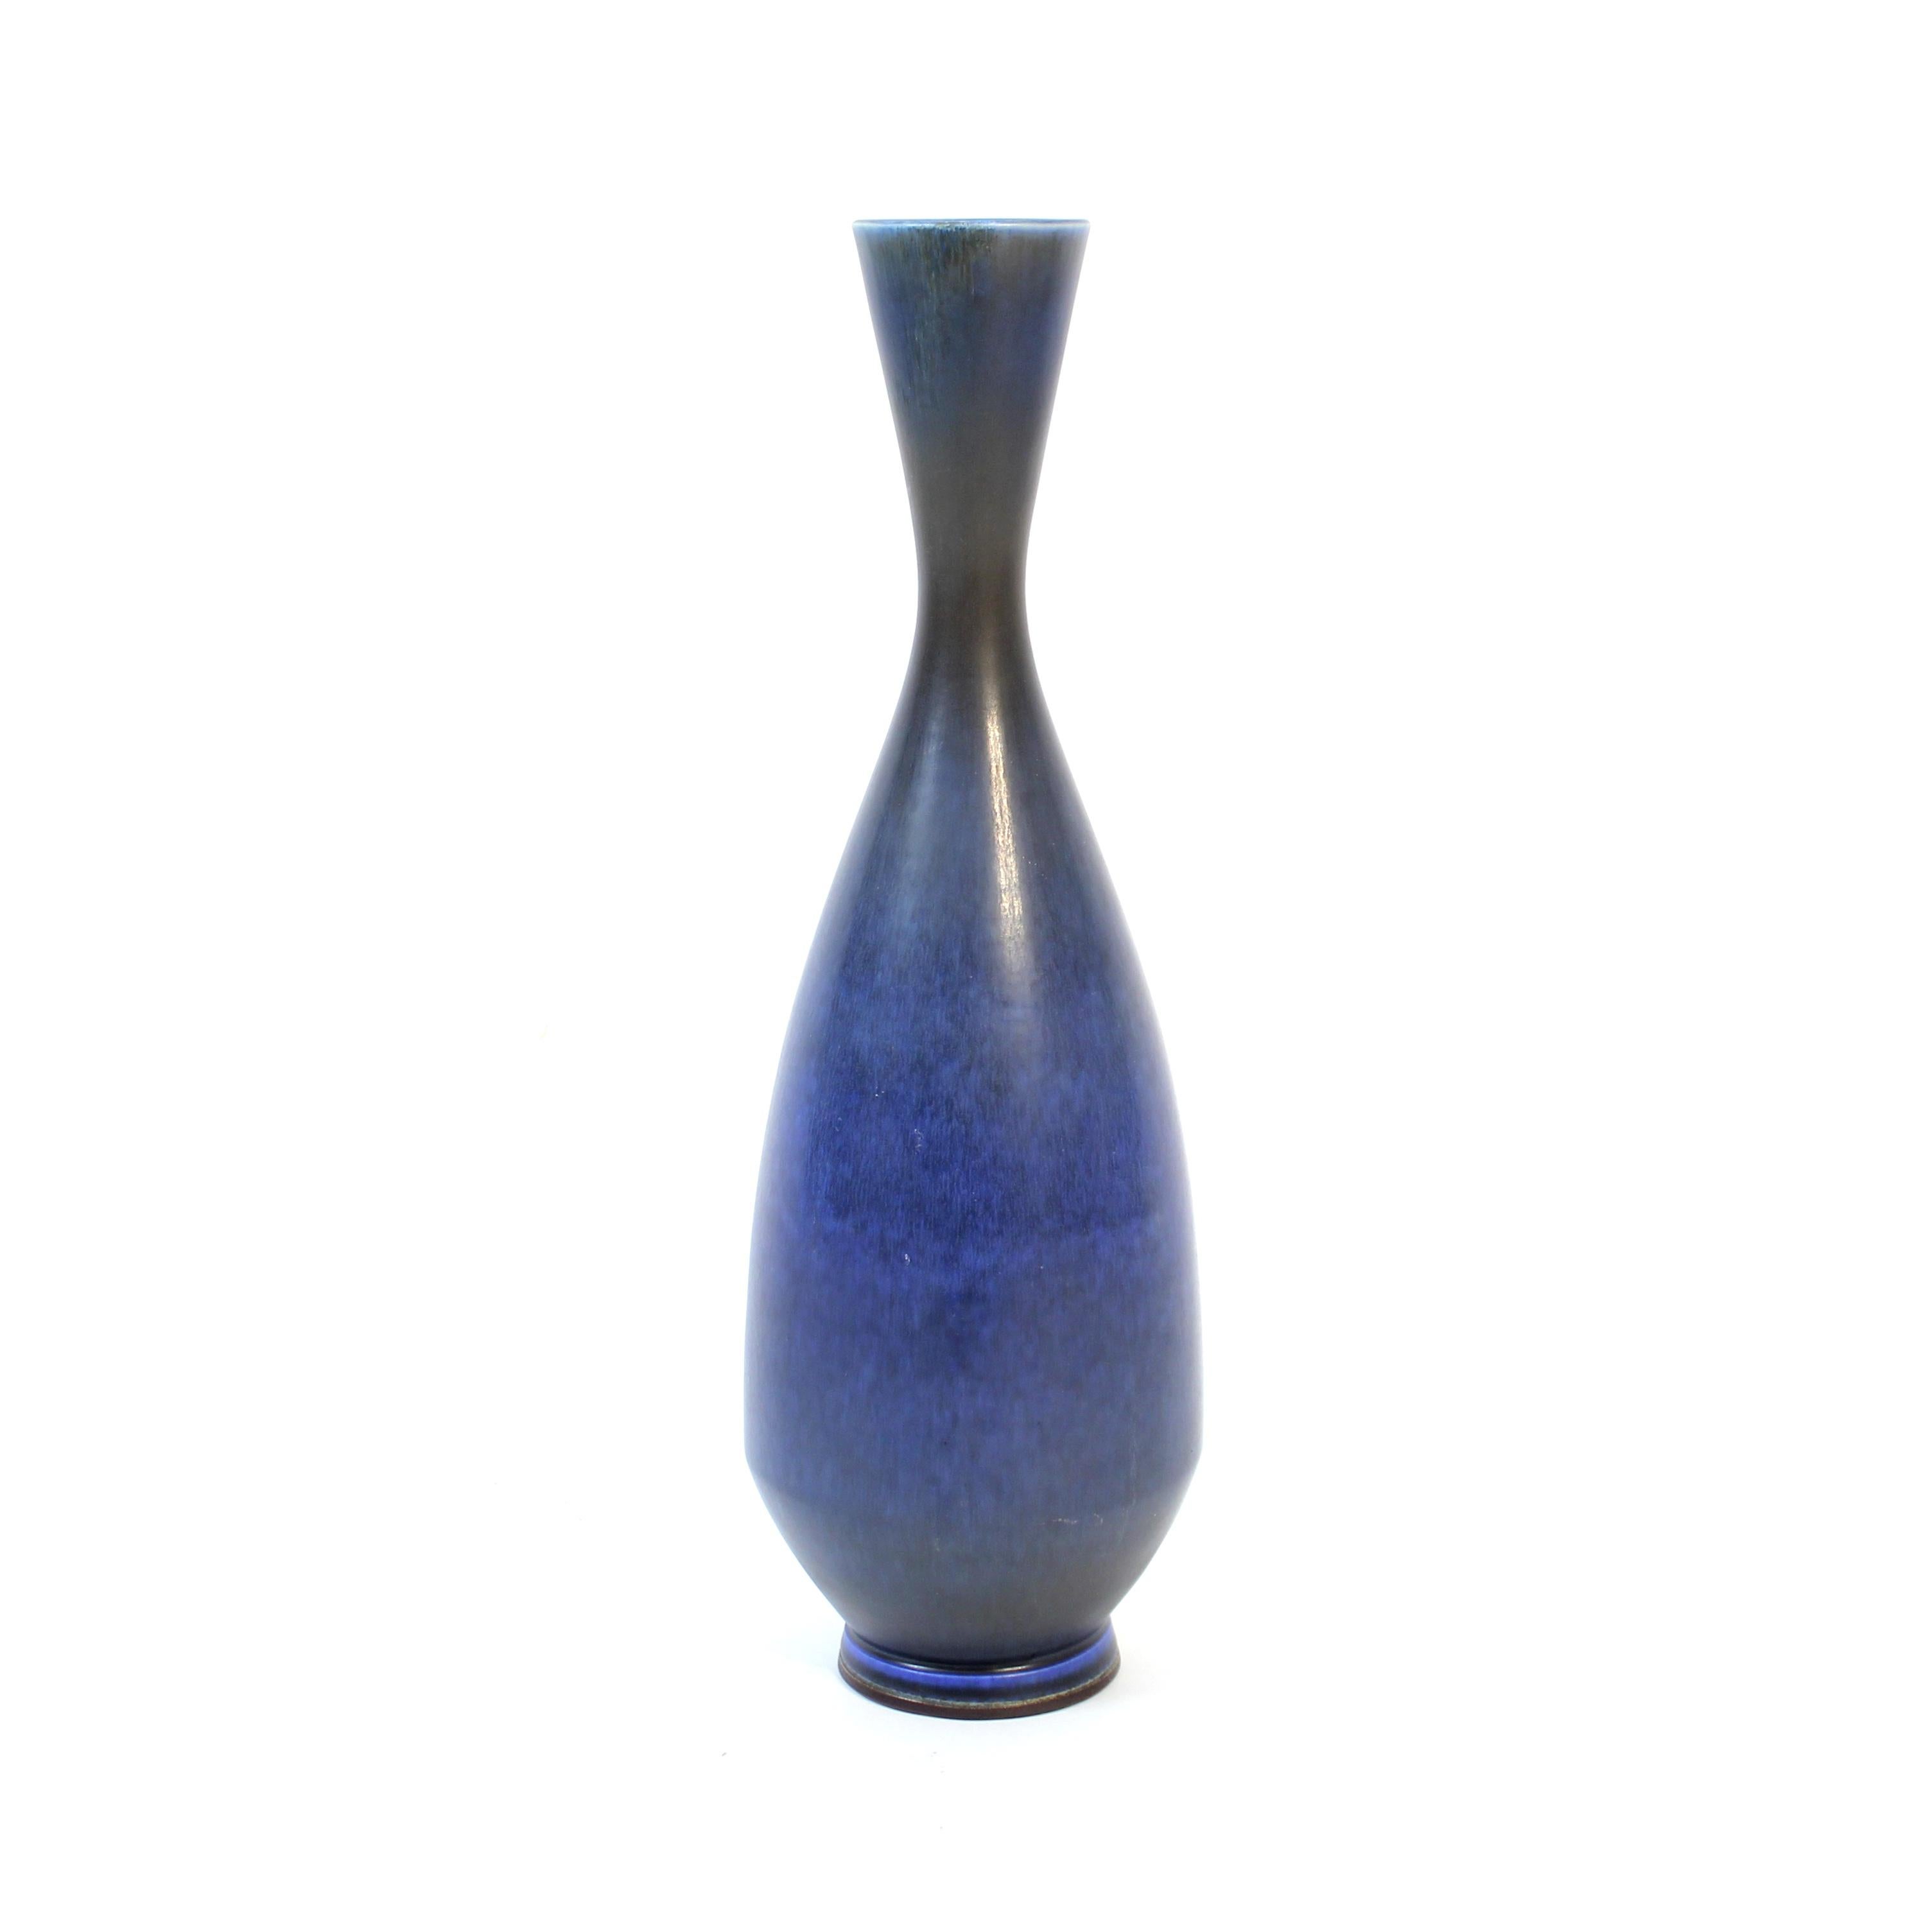 Large blue vase with hare fur glaze designed by Berndt Friberg for Gustavsberg studios in the 1950s. Impressive size and much larger than most Friberg vases. The vase has been restored by the top Swedish ceramic restore and is now in a very good